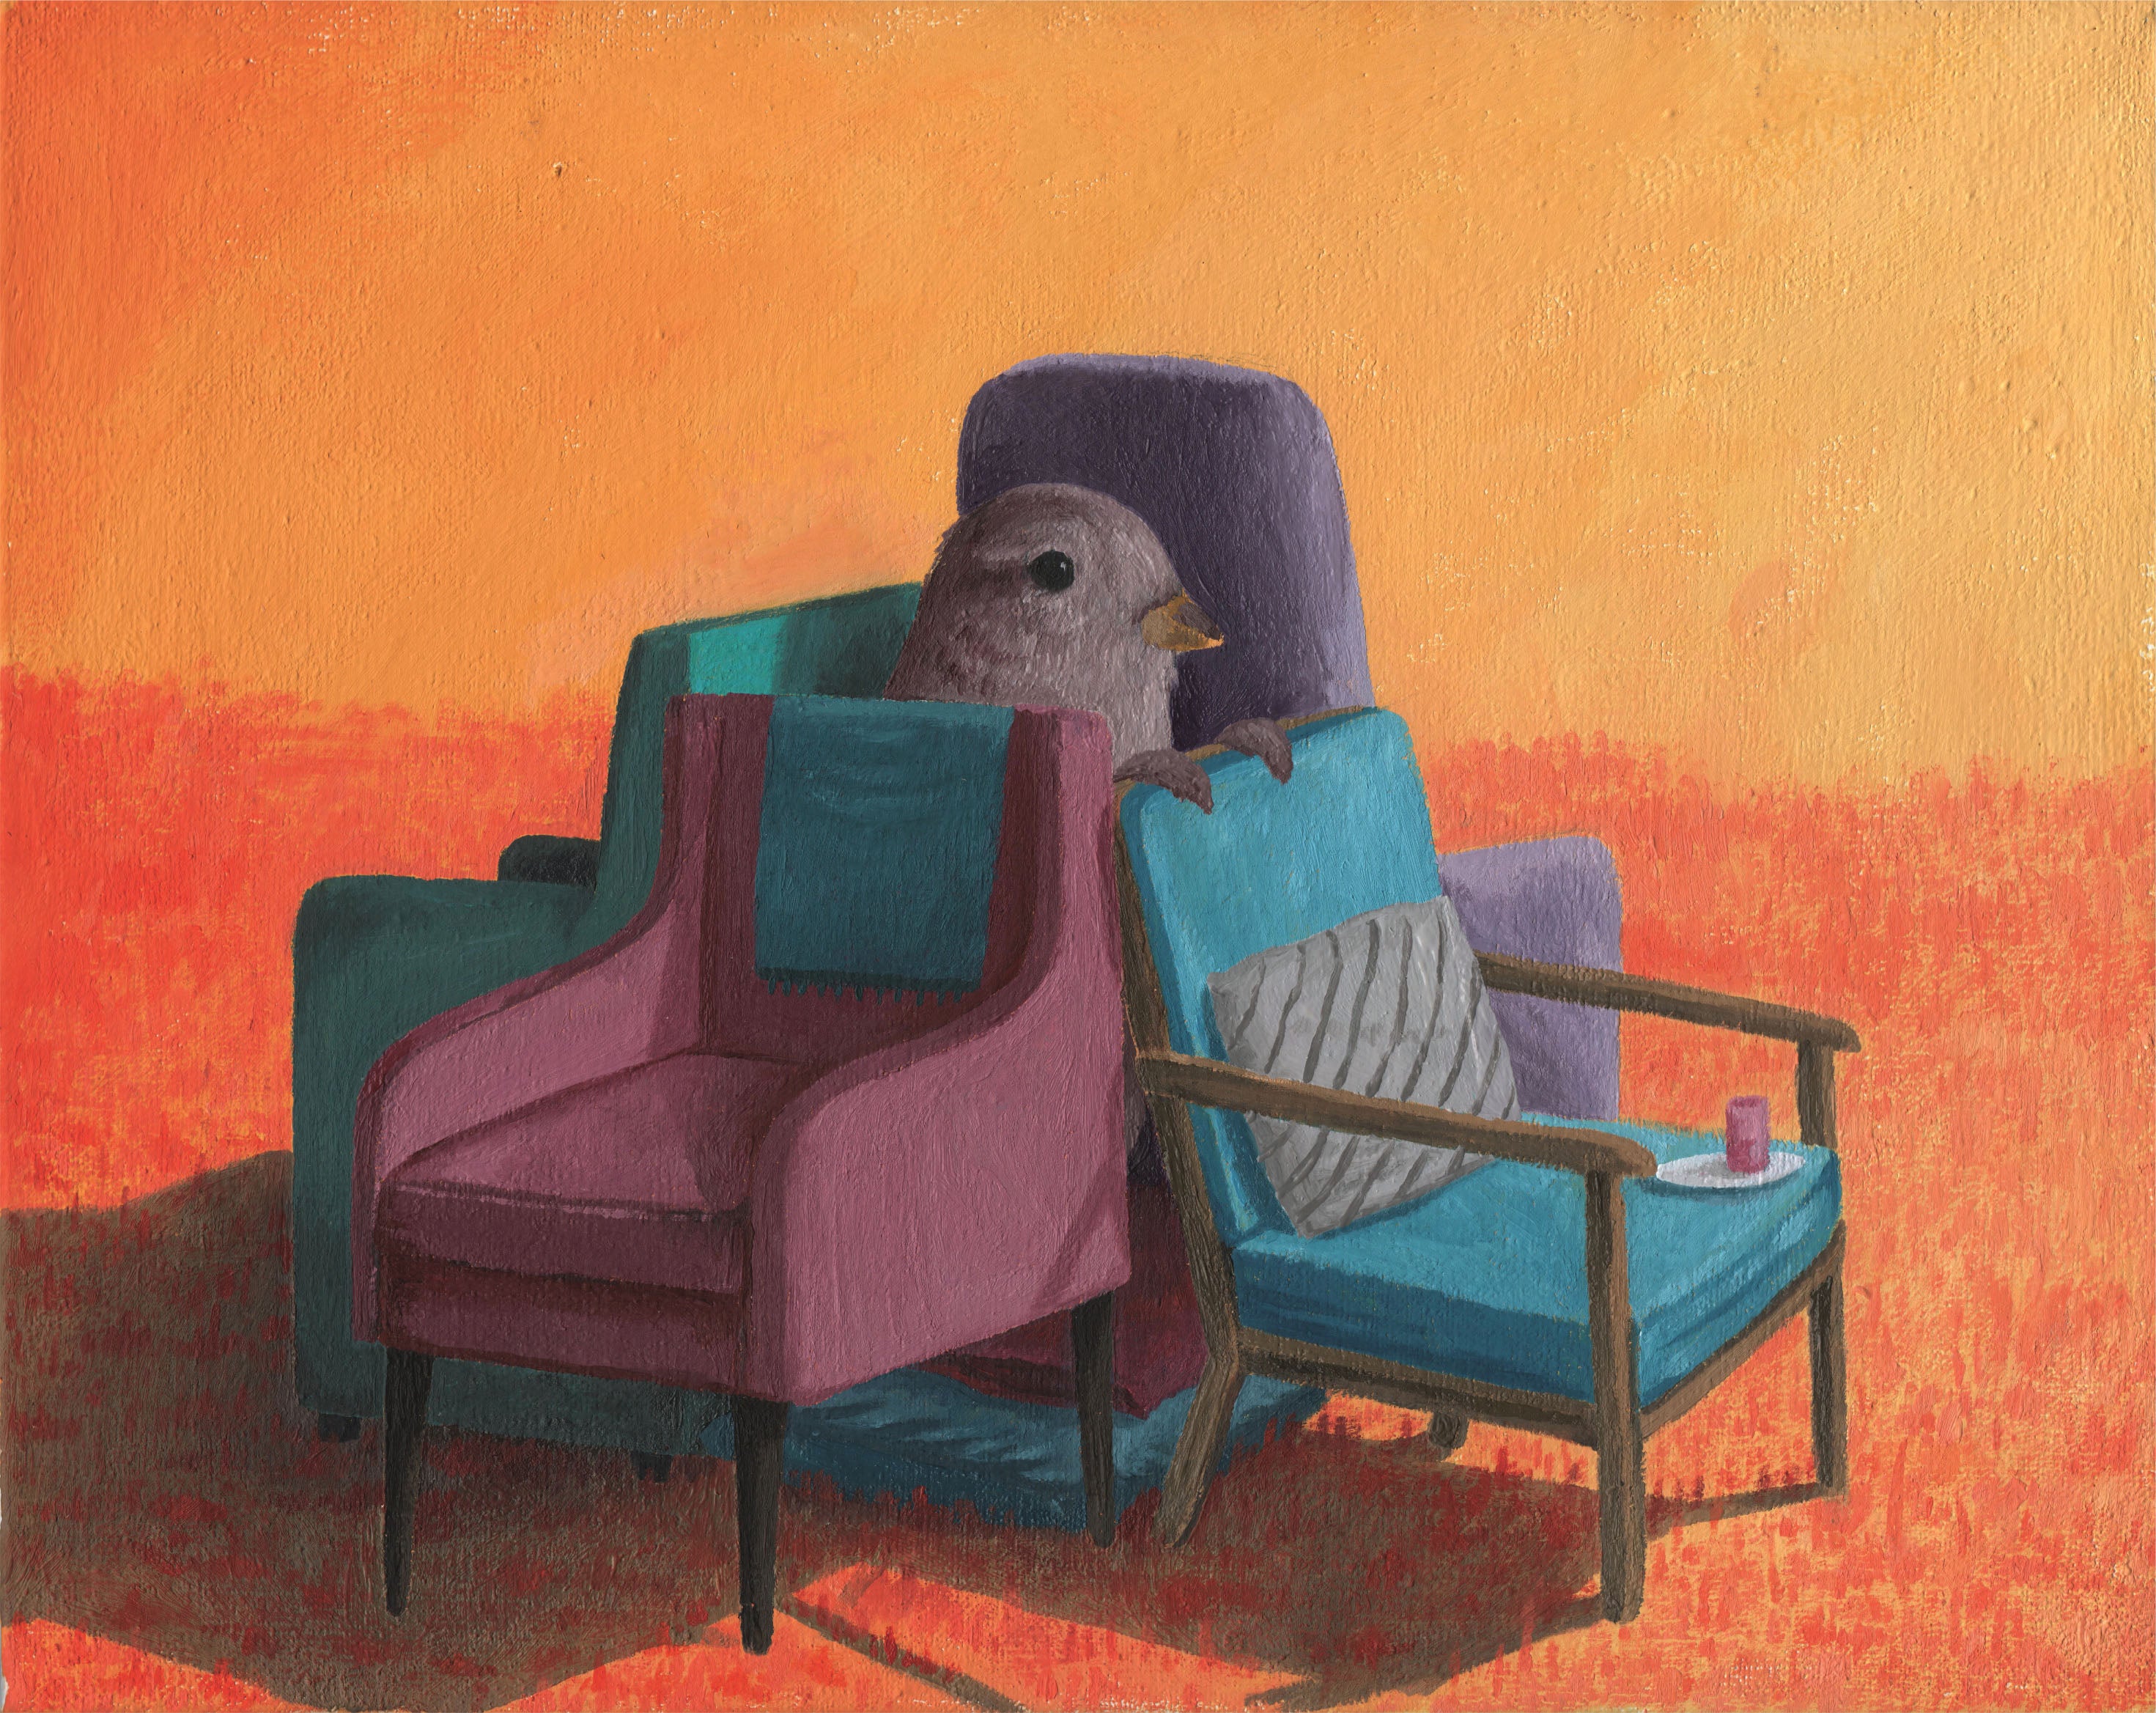 Orange canvas with grey bird and four chairs 